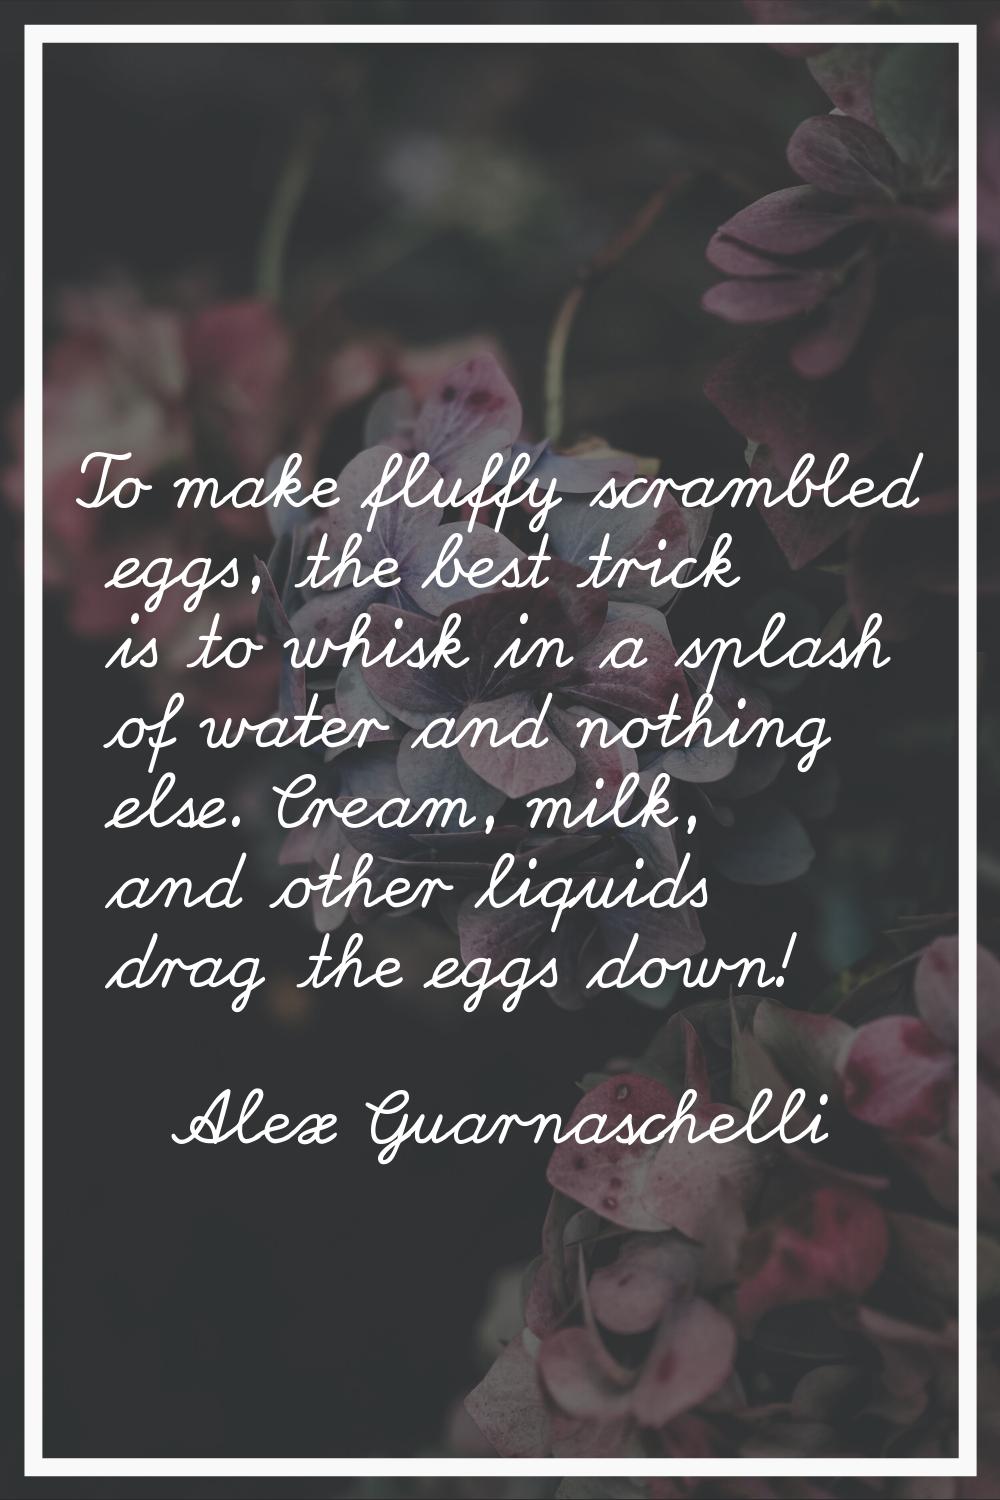 To make fluffy scrambled eggs, the best trick is to whisk in a splash of water and nothing else. Cr